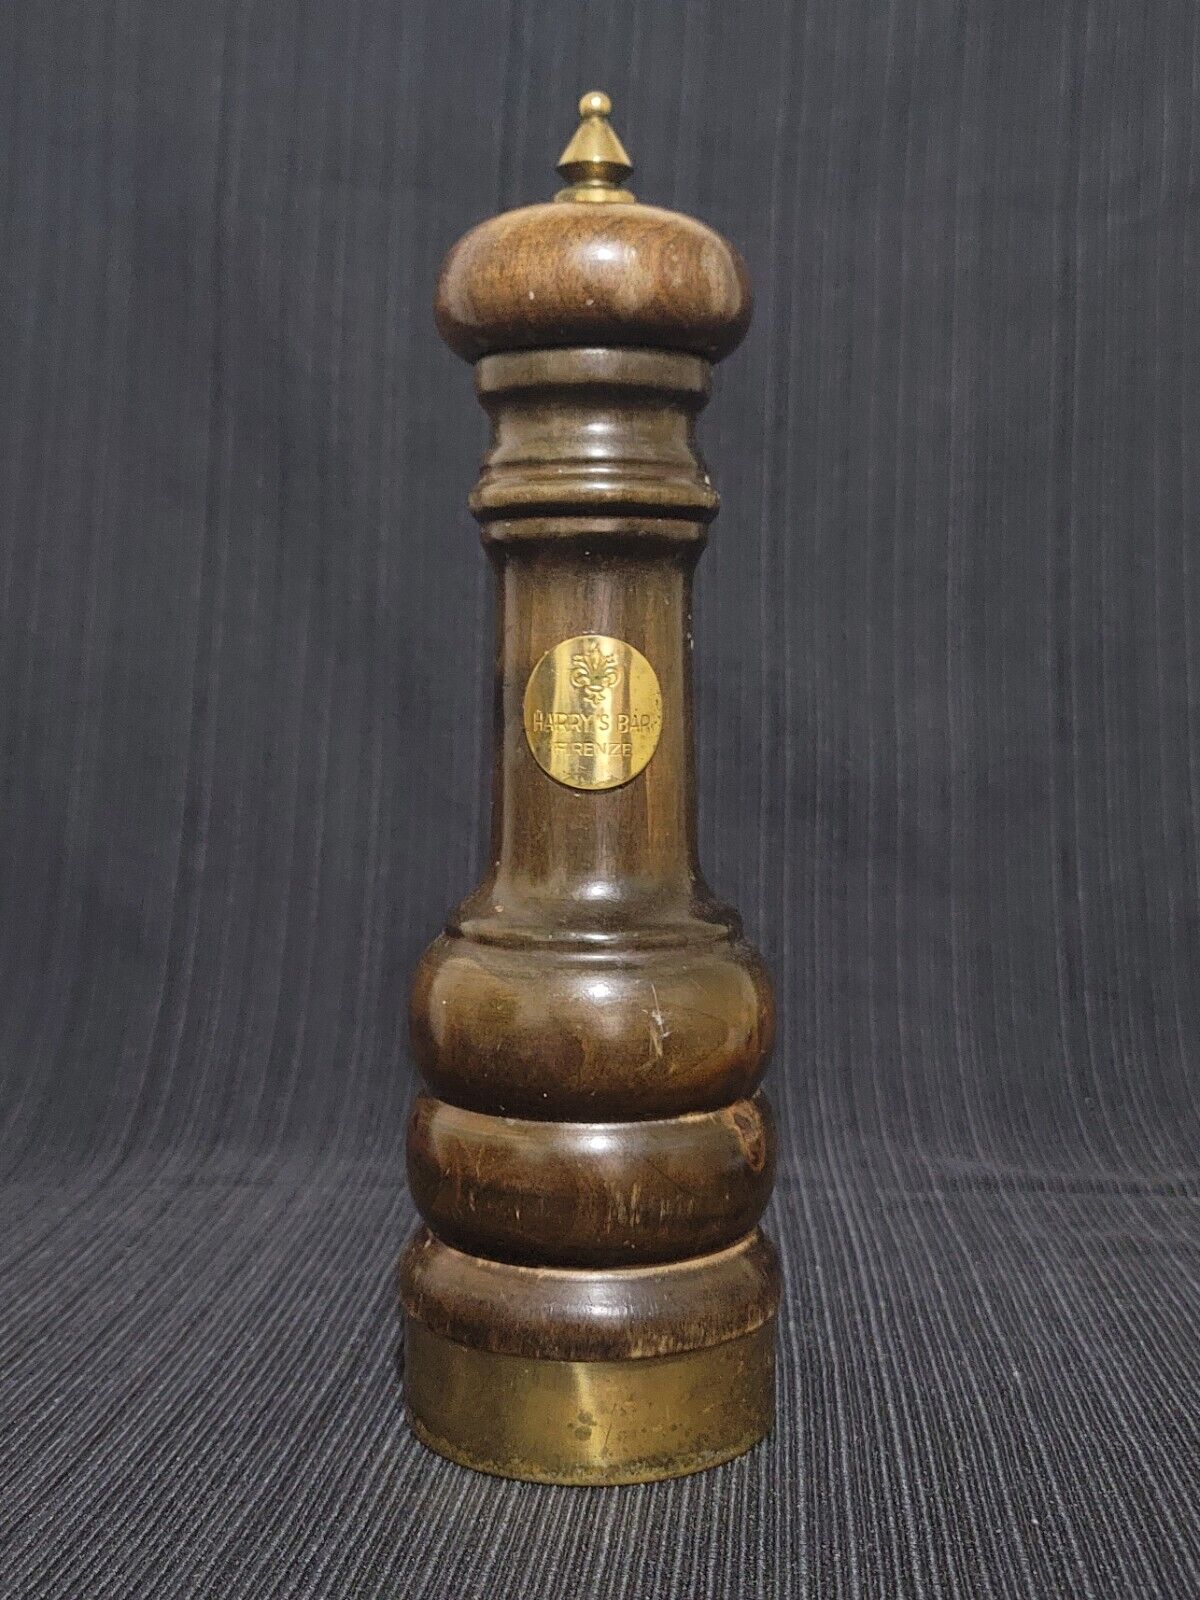 Vintage Harry's Bar Wooden Salt/Peppermill With Spices Firenze Italy